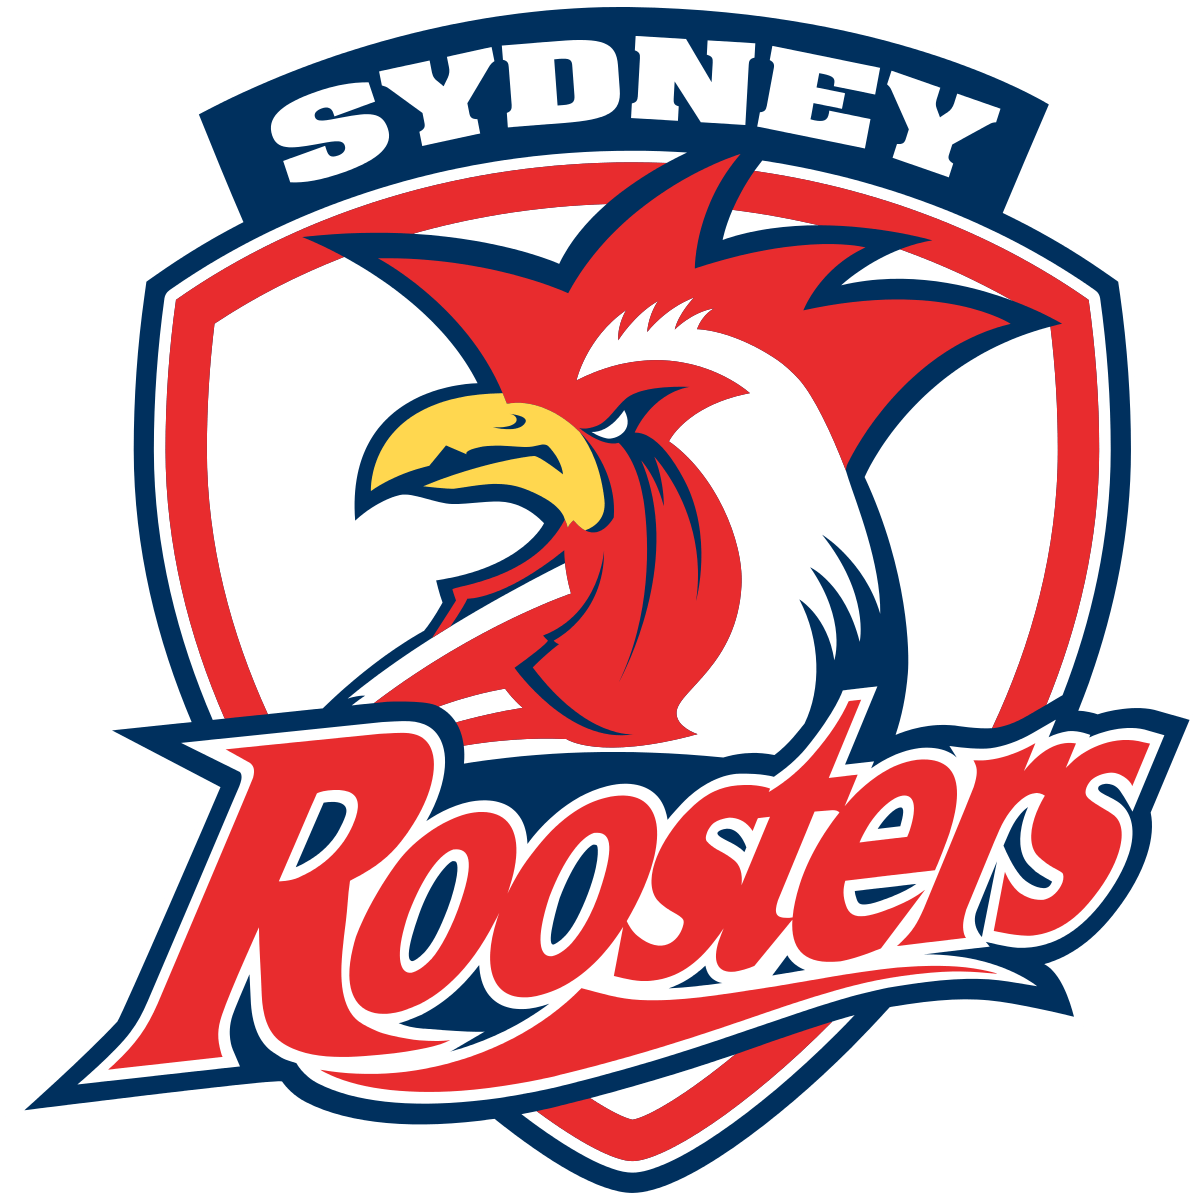 Australian Rugby League Logo - Sydney Roosters